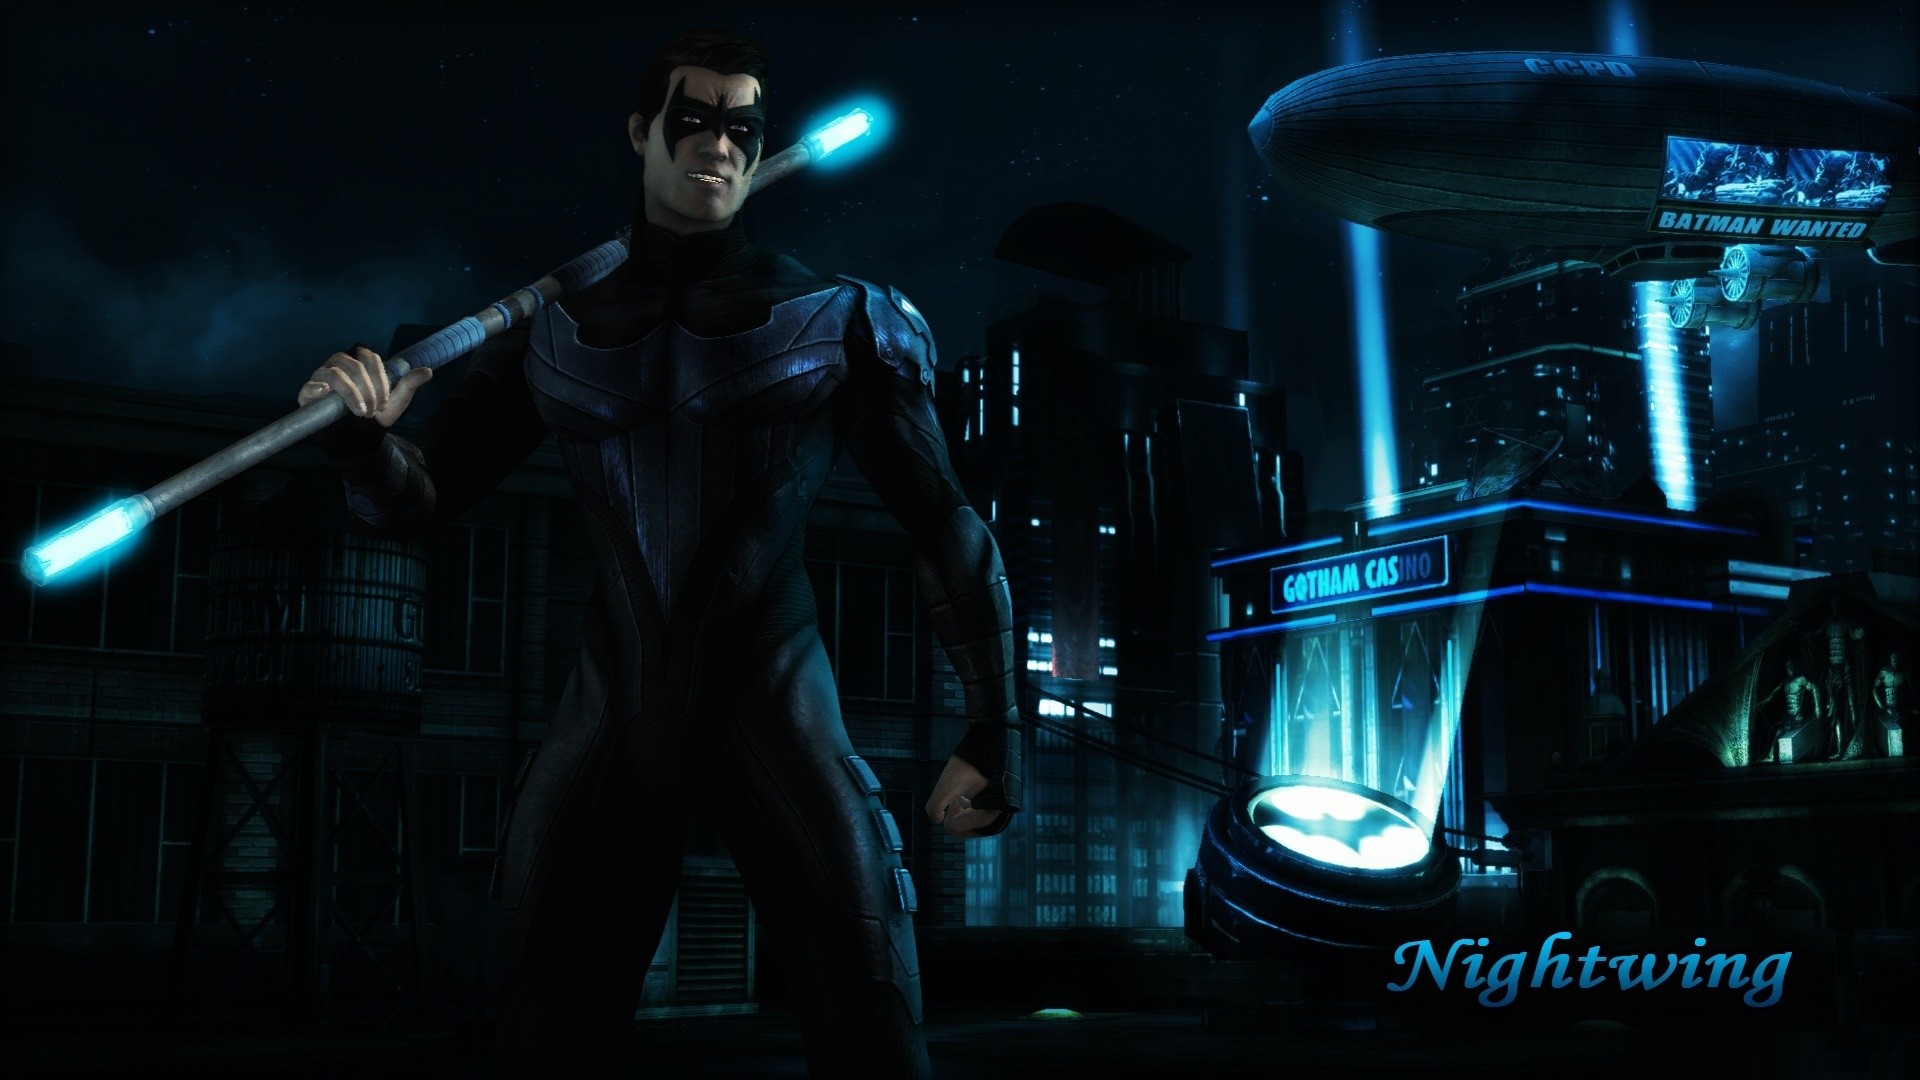 1920x1080 Source : http://www.bhmpics.com/view-nightwing_injustice_gods_among_us .